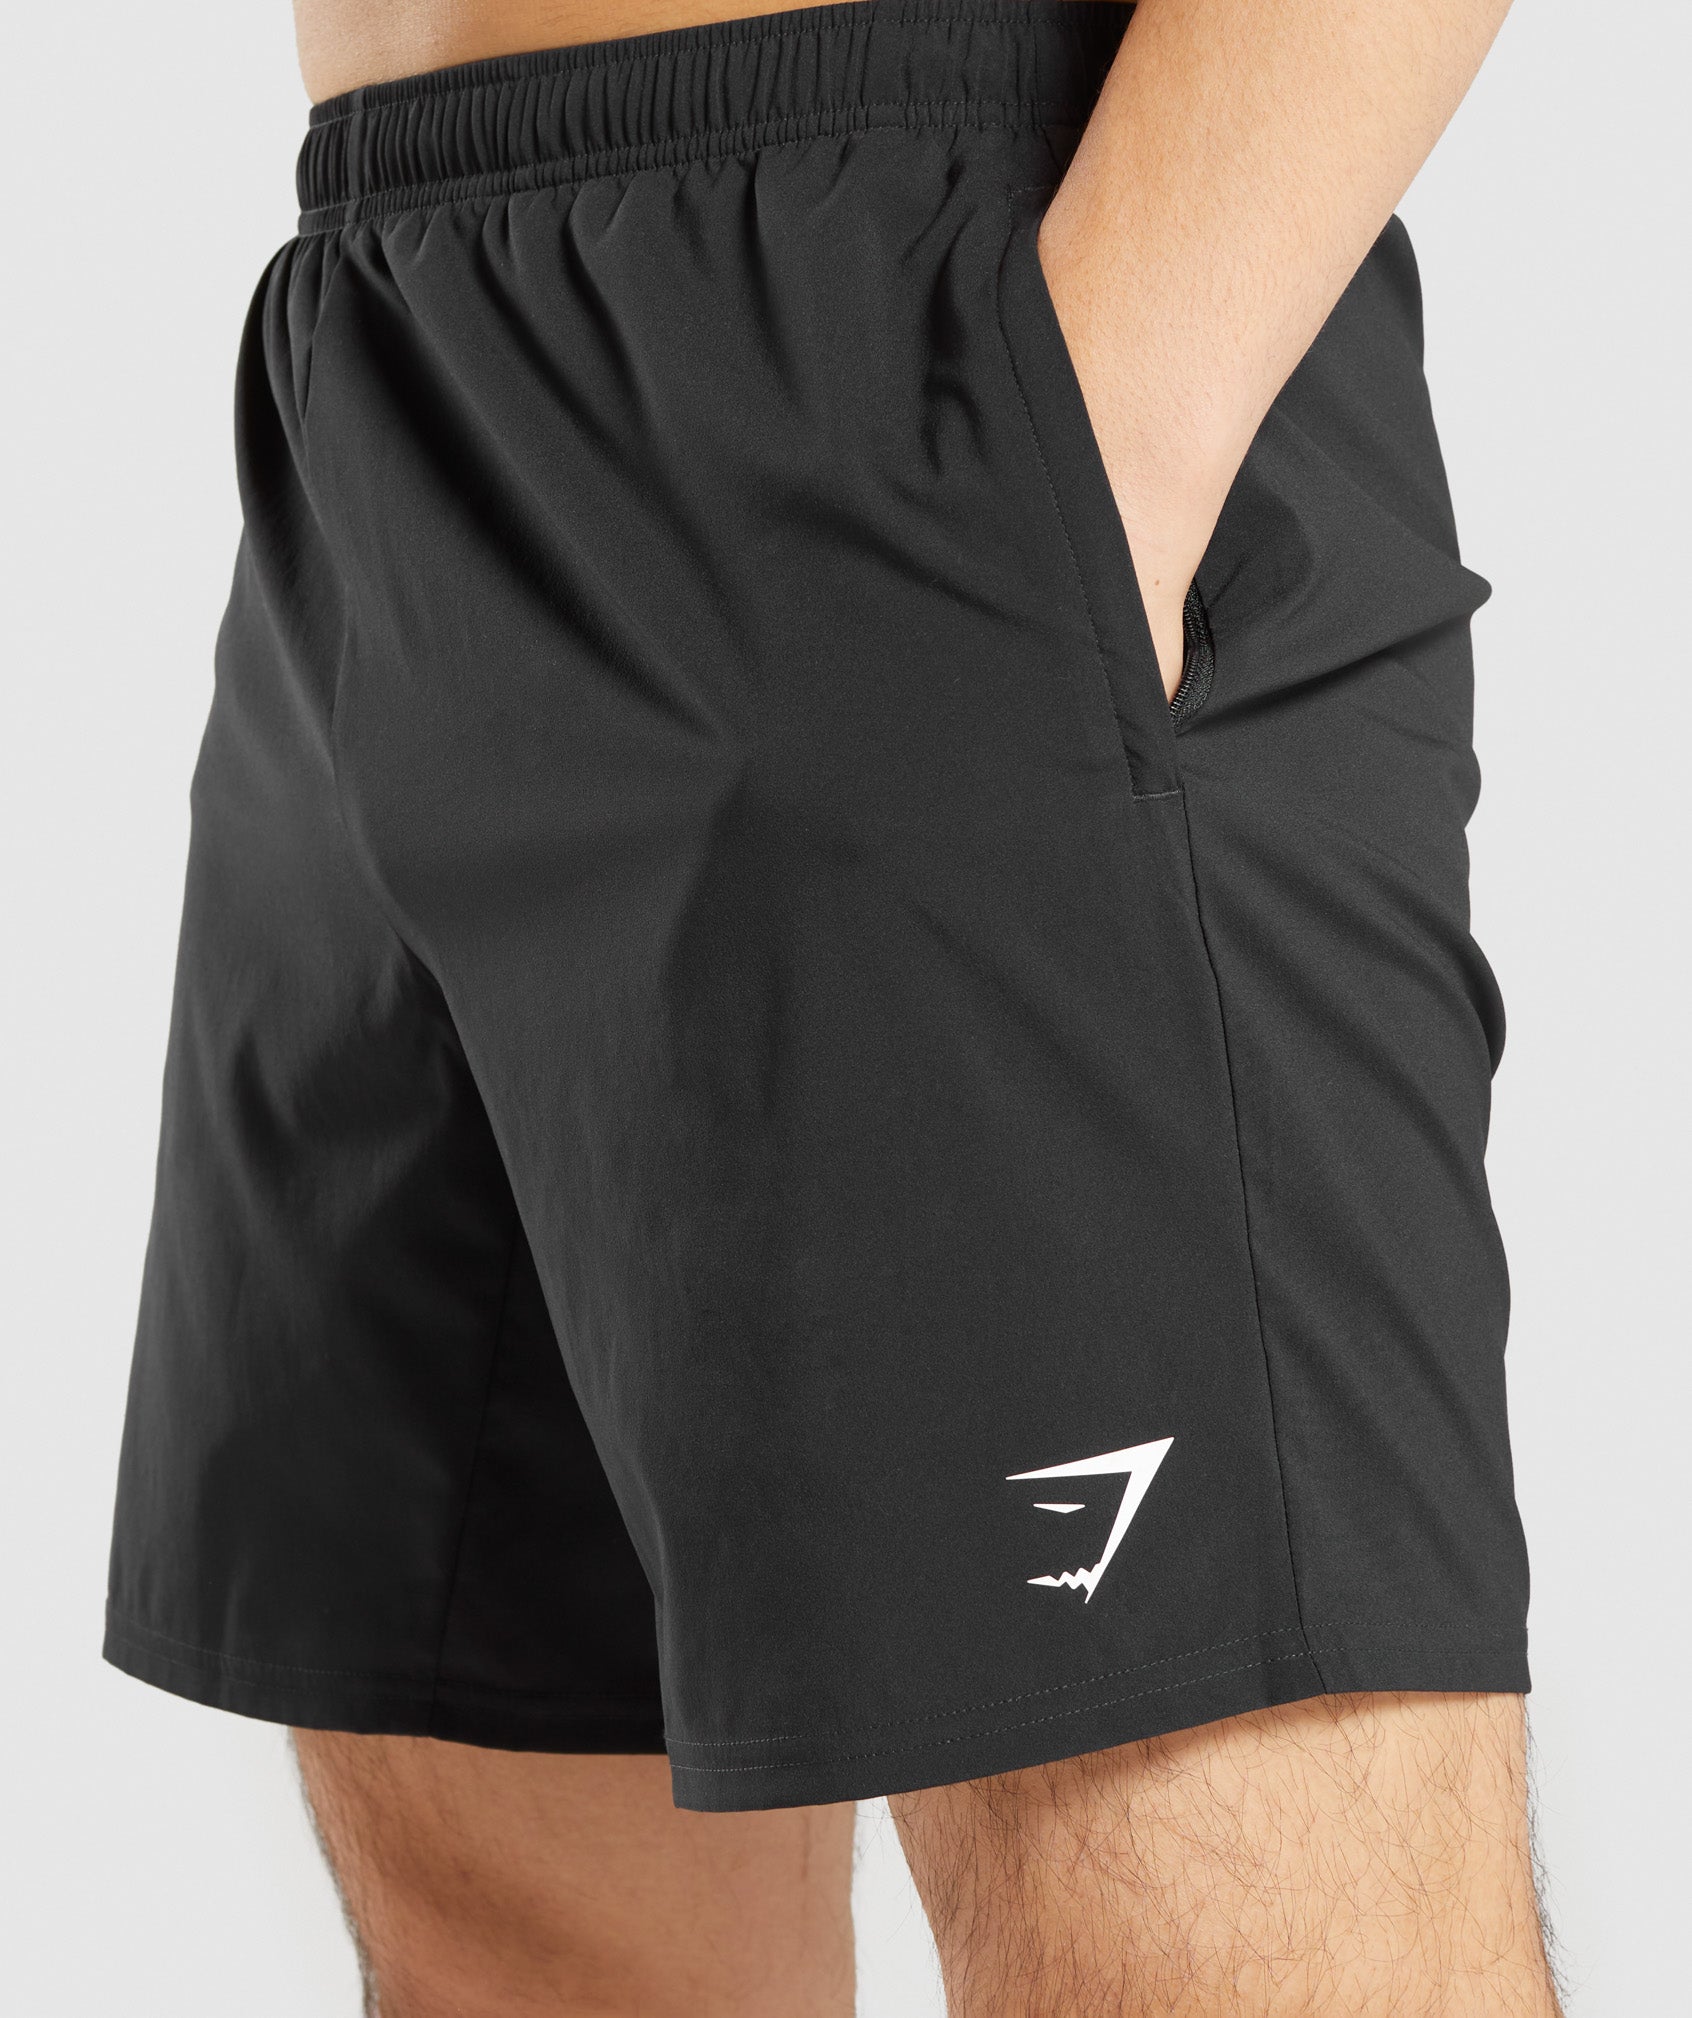 Gymshark Black Running Shorts Size M - $25 - From Lindsy